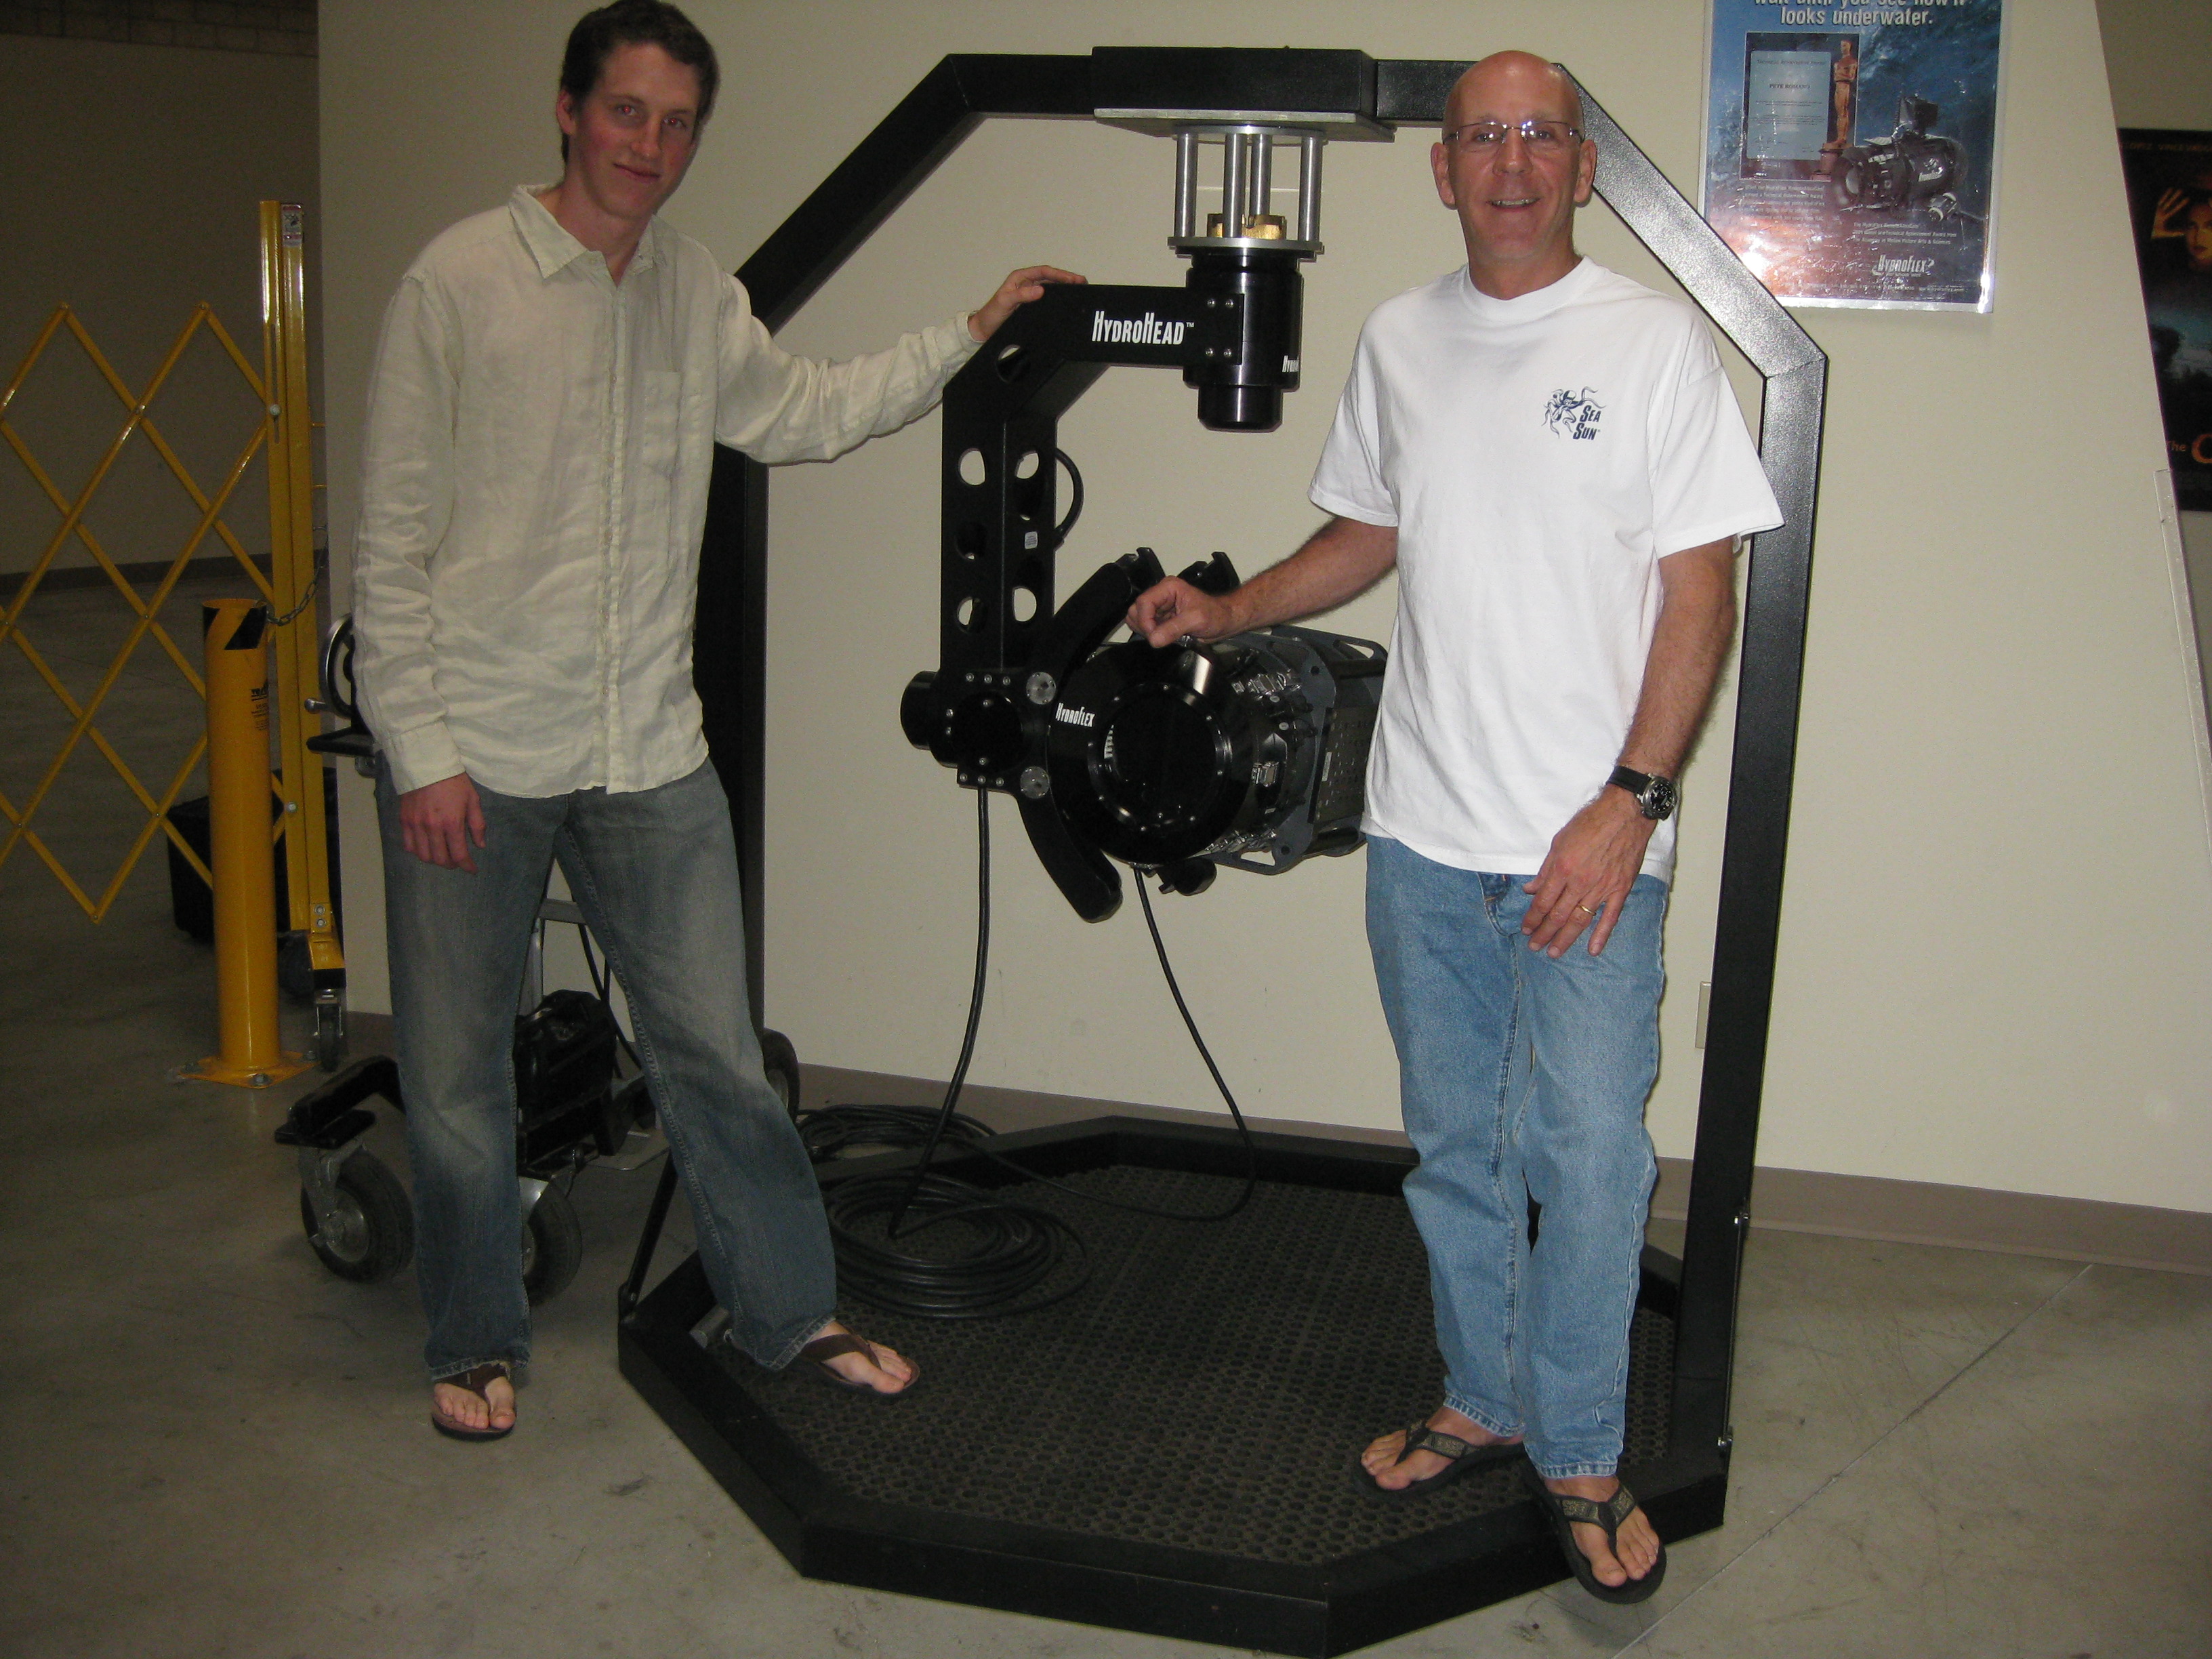 Still of David James Goulard and Pete Romano next to a cool HydroFlex 435 RemoteAquacam, the 435 Remote AquaCam provides 100% video for remote viewing.